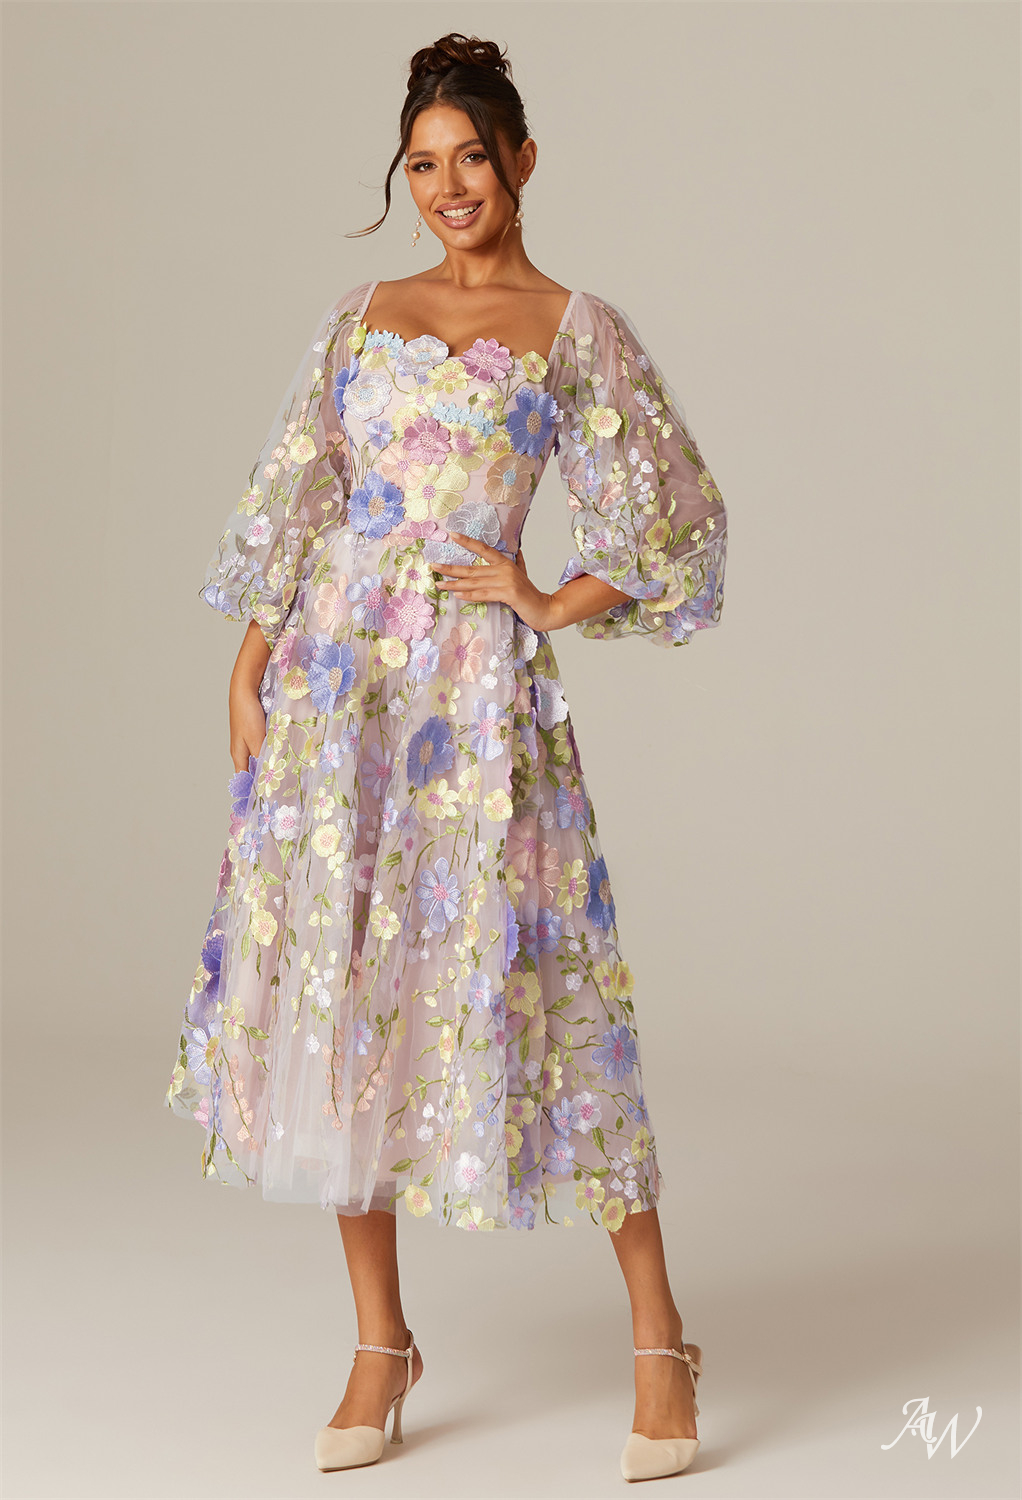 tambere cora dress - floral - MTH